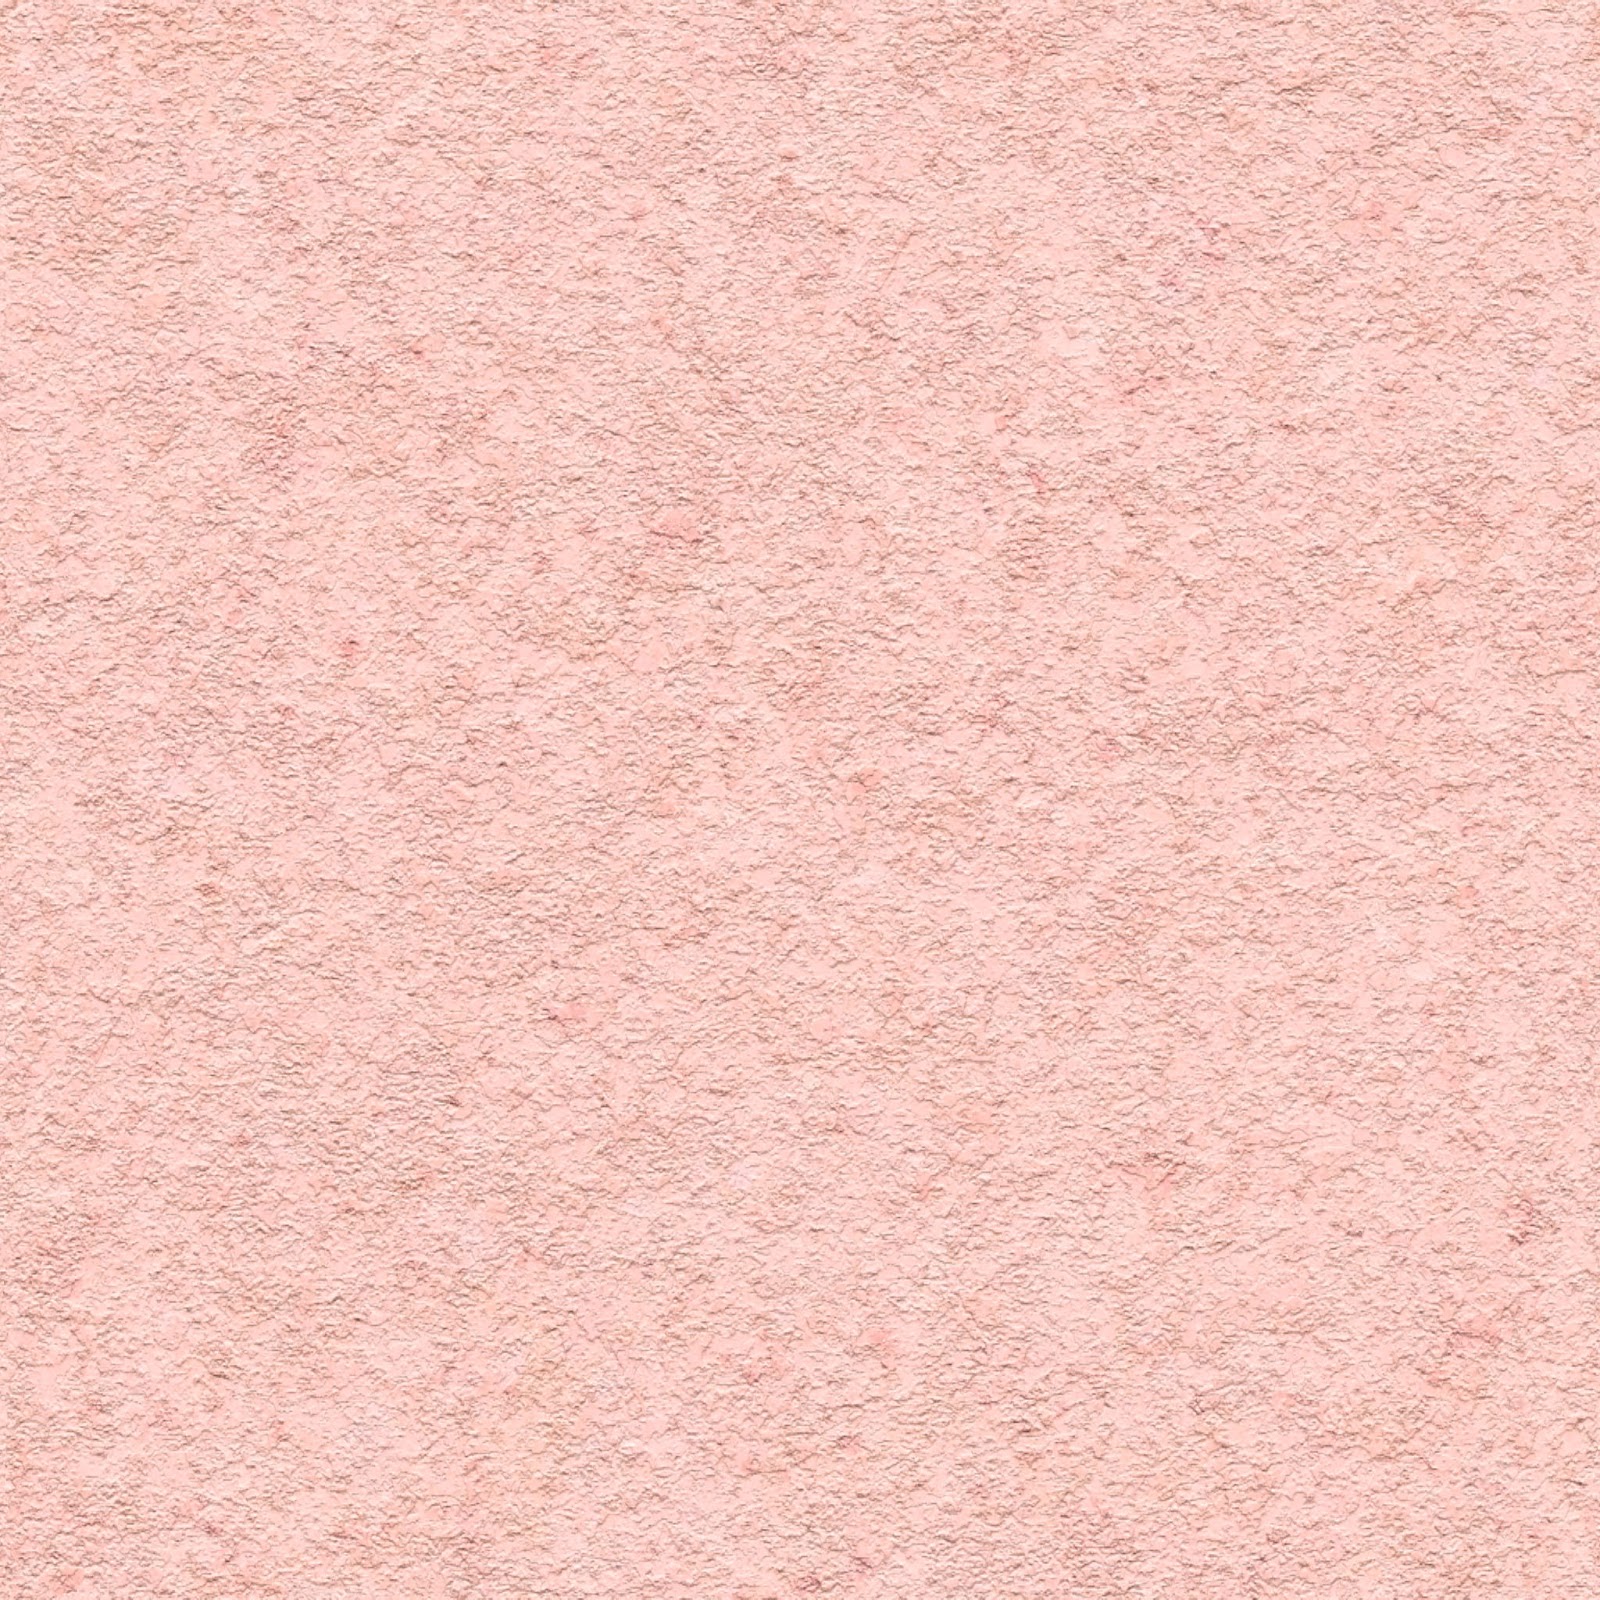 Rough_dirty_stucco_pink_paint_plaster_wall_texture_seamless_tileable